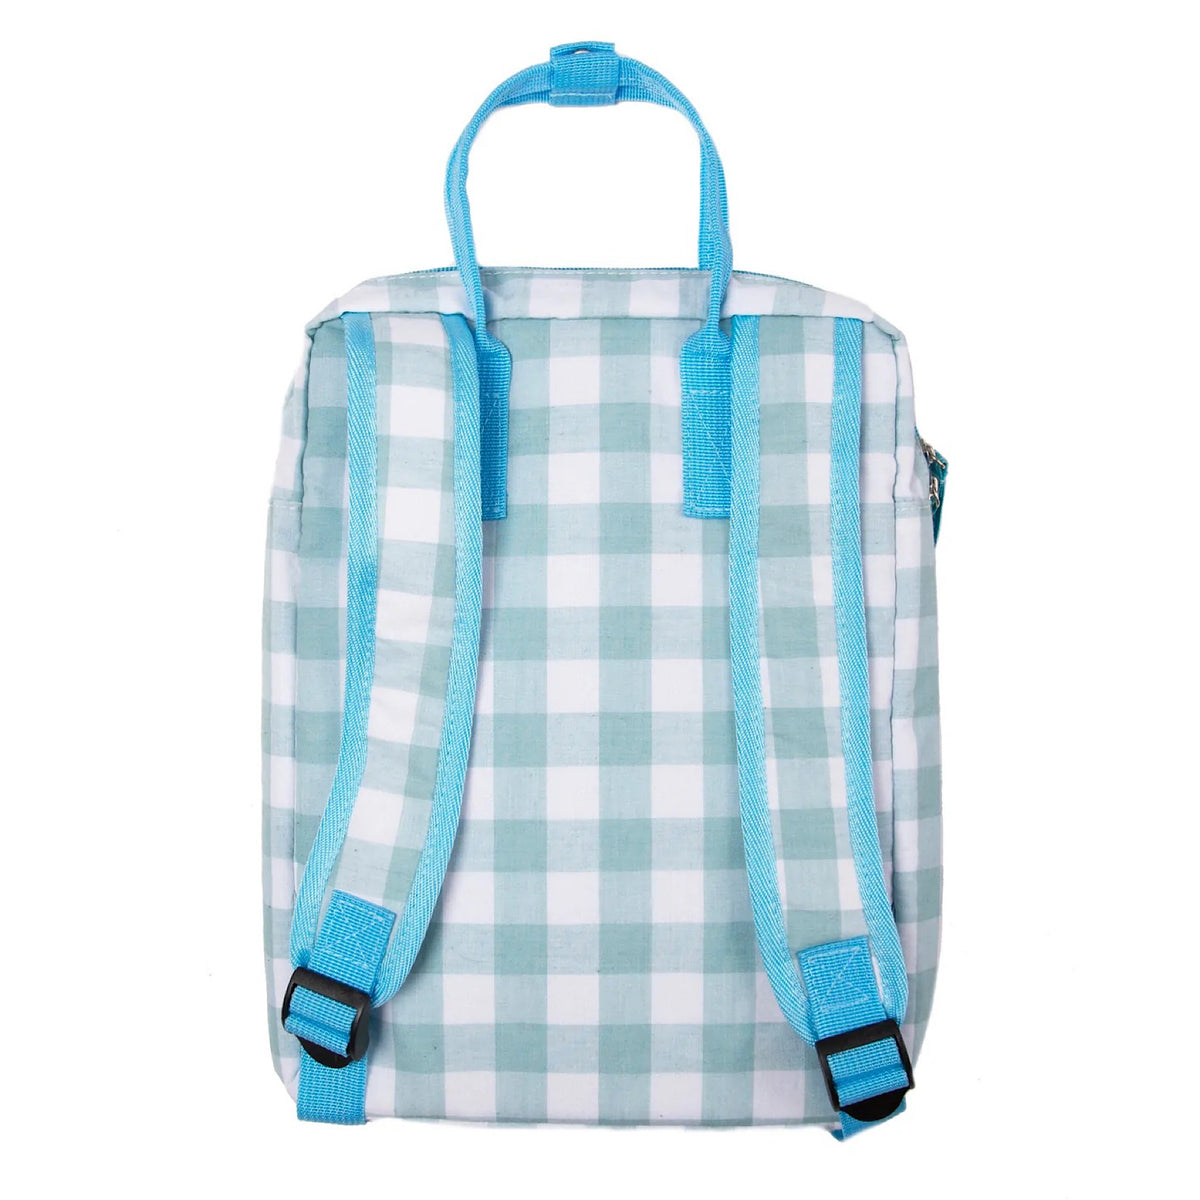 Retro Check Backpack, Green